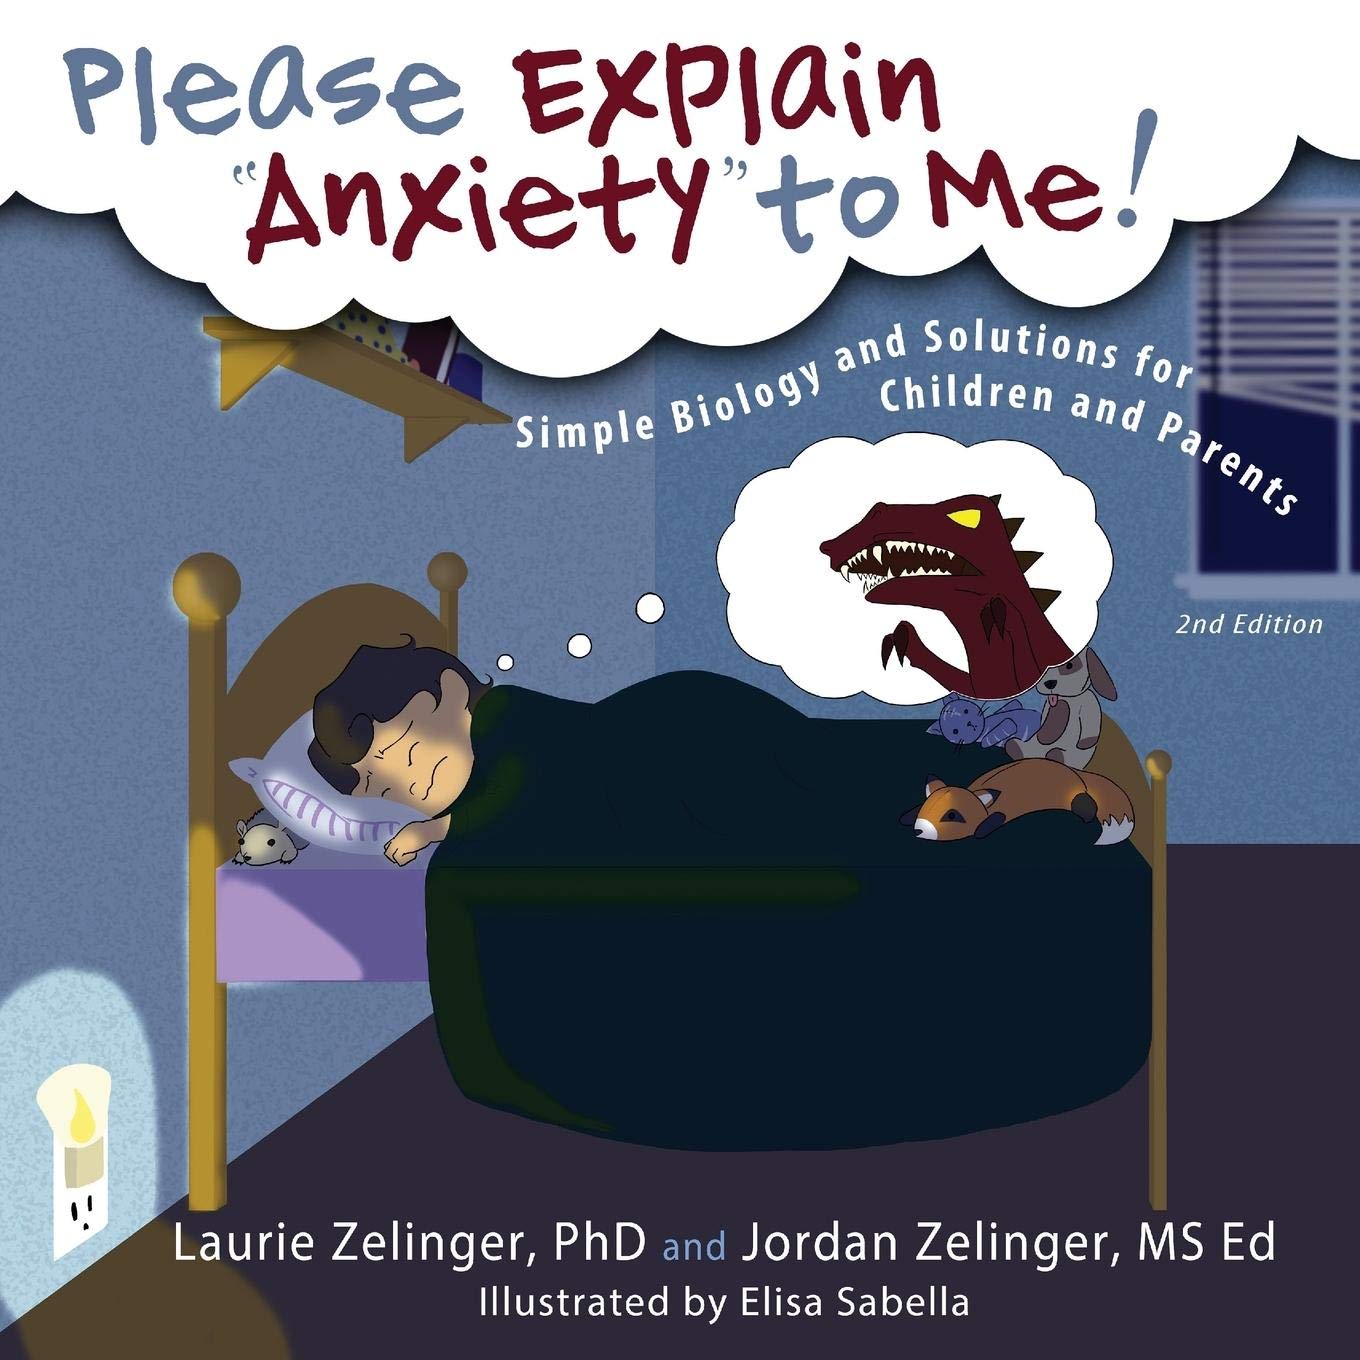 Please Explain Anxiety To Me! Simple Biology And Solutions For Children and Parents